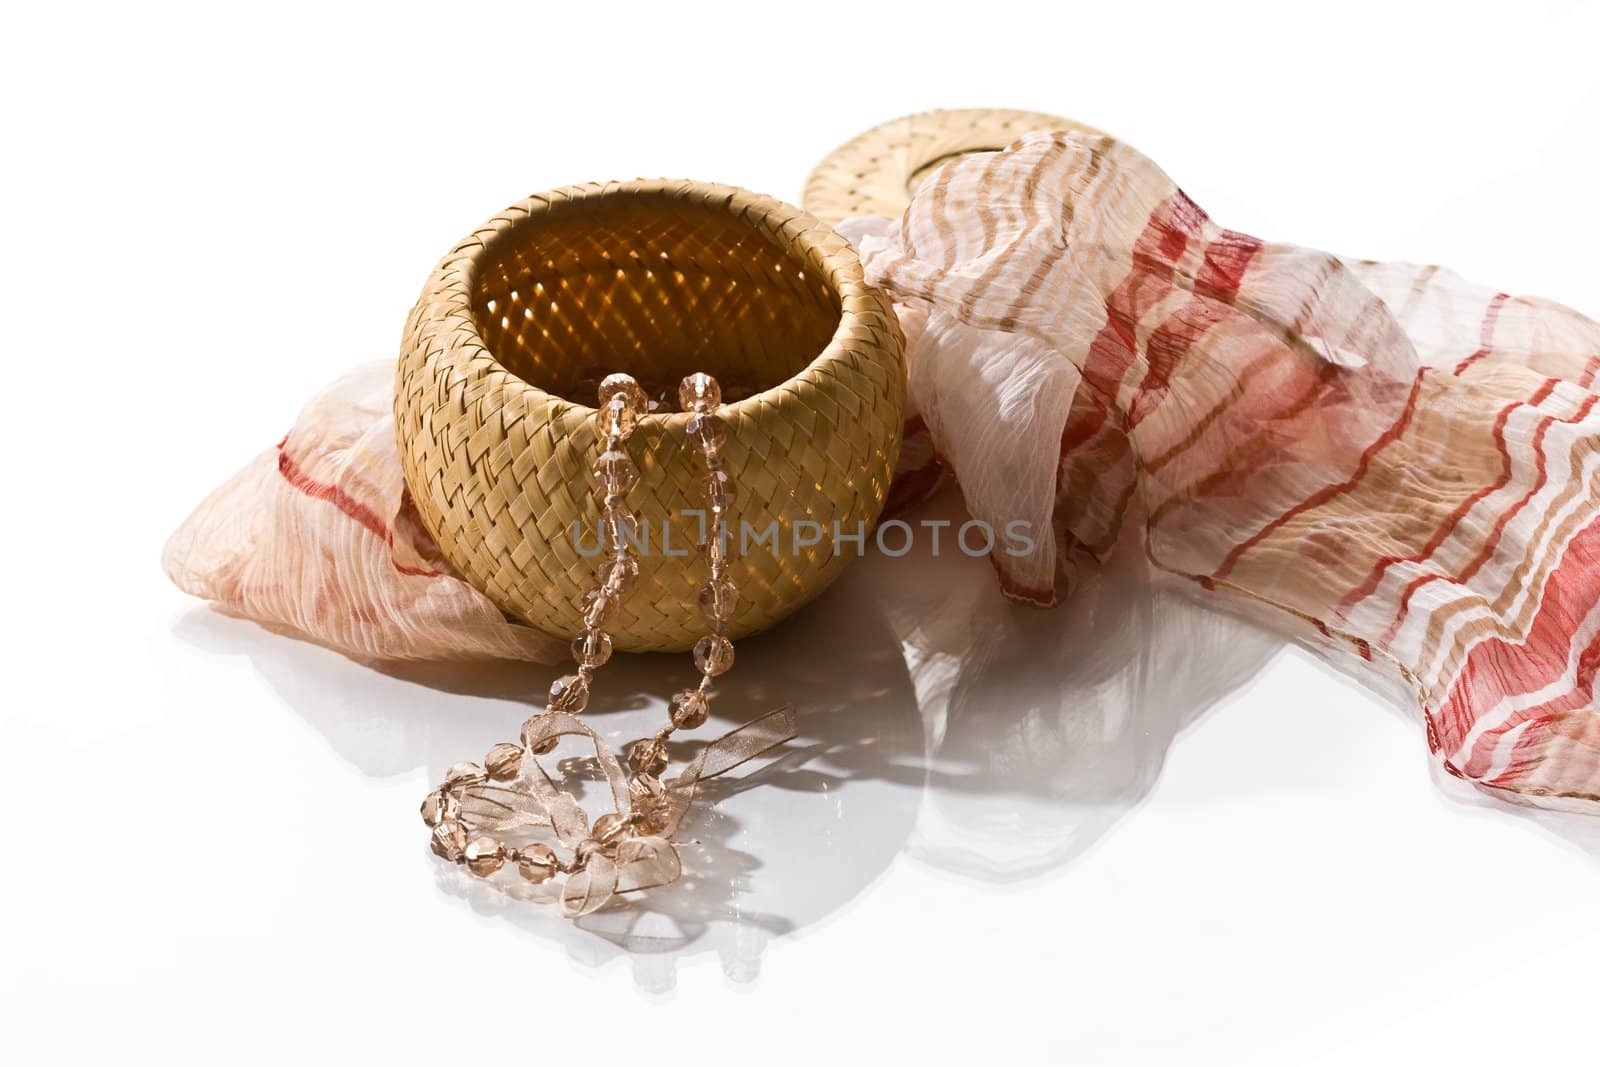 woman's accessory, still life with casket, beads and scarf